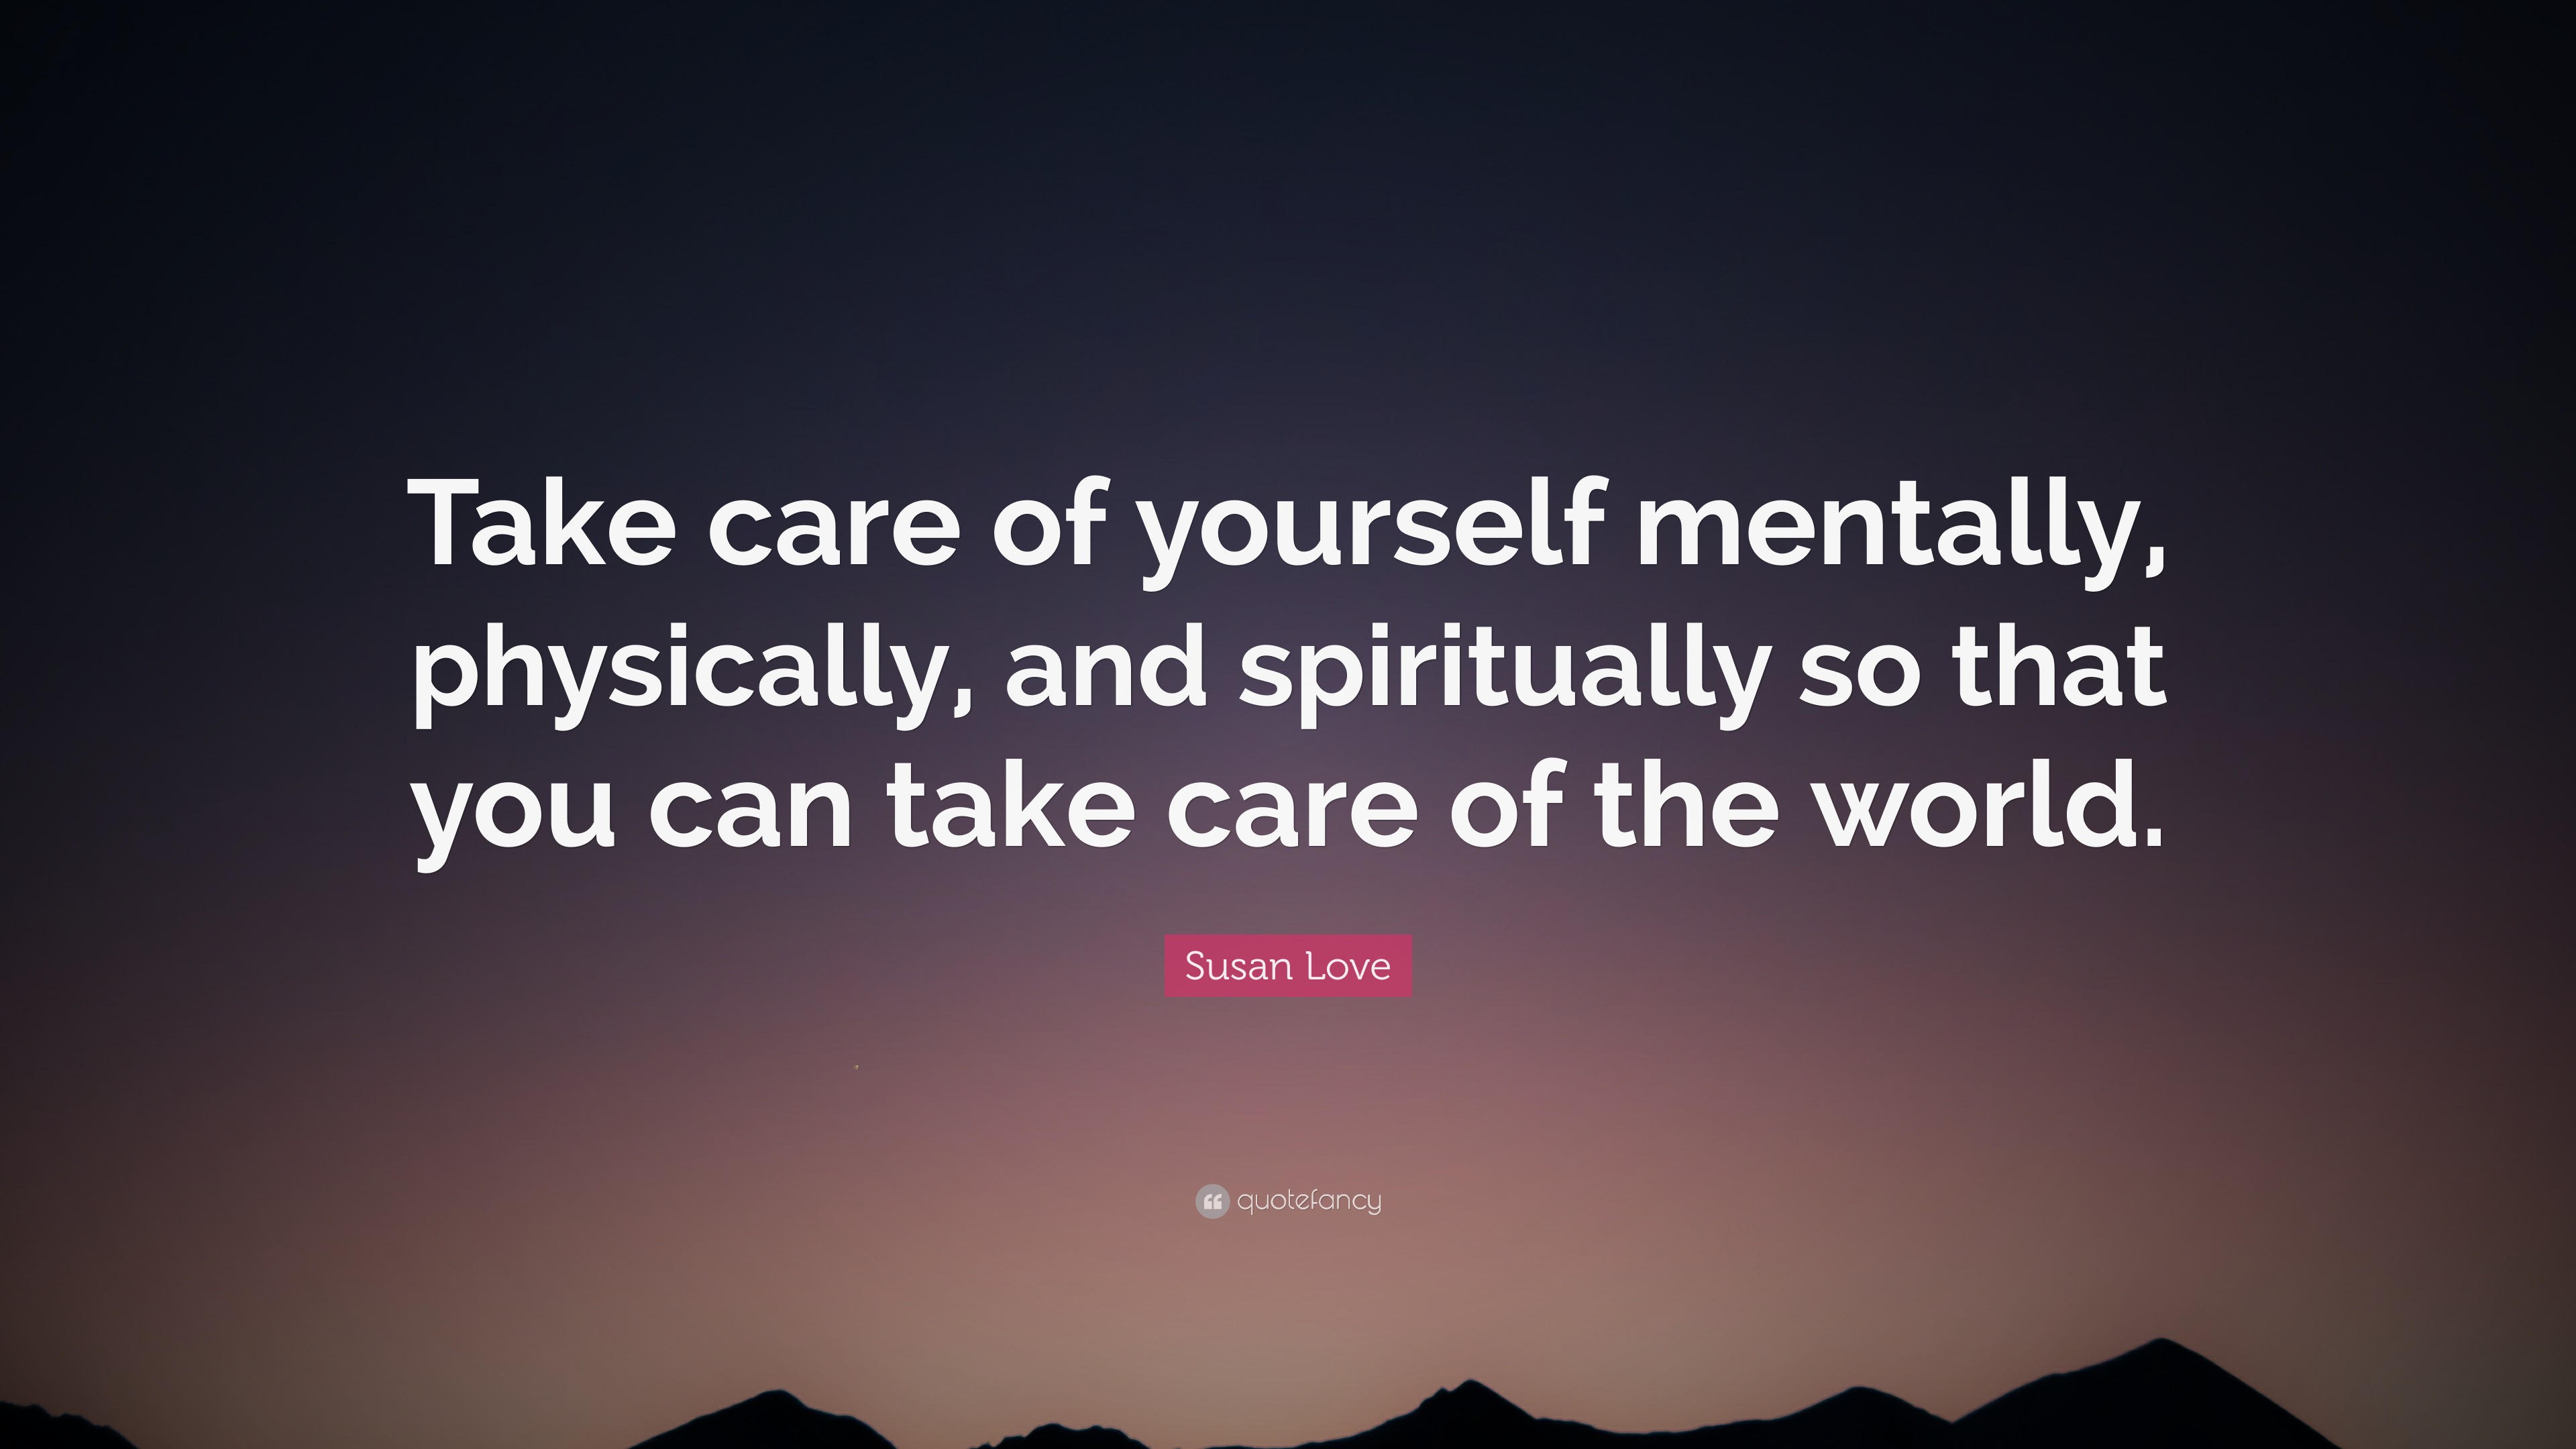 Susan Love Quote “Take care of yourself mentally physically and spiritually so